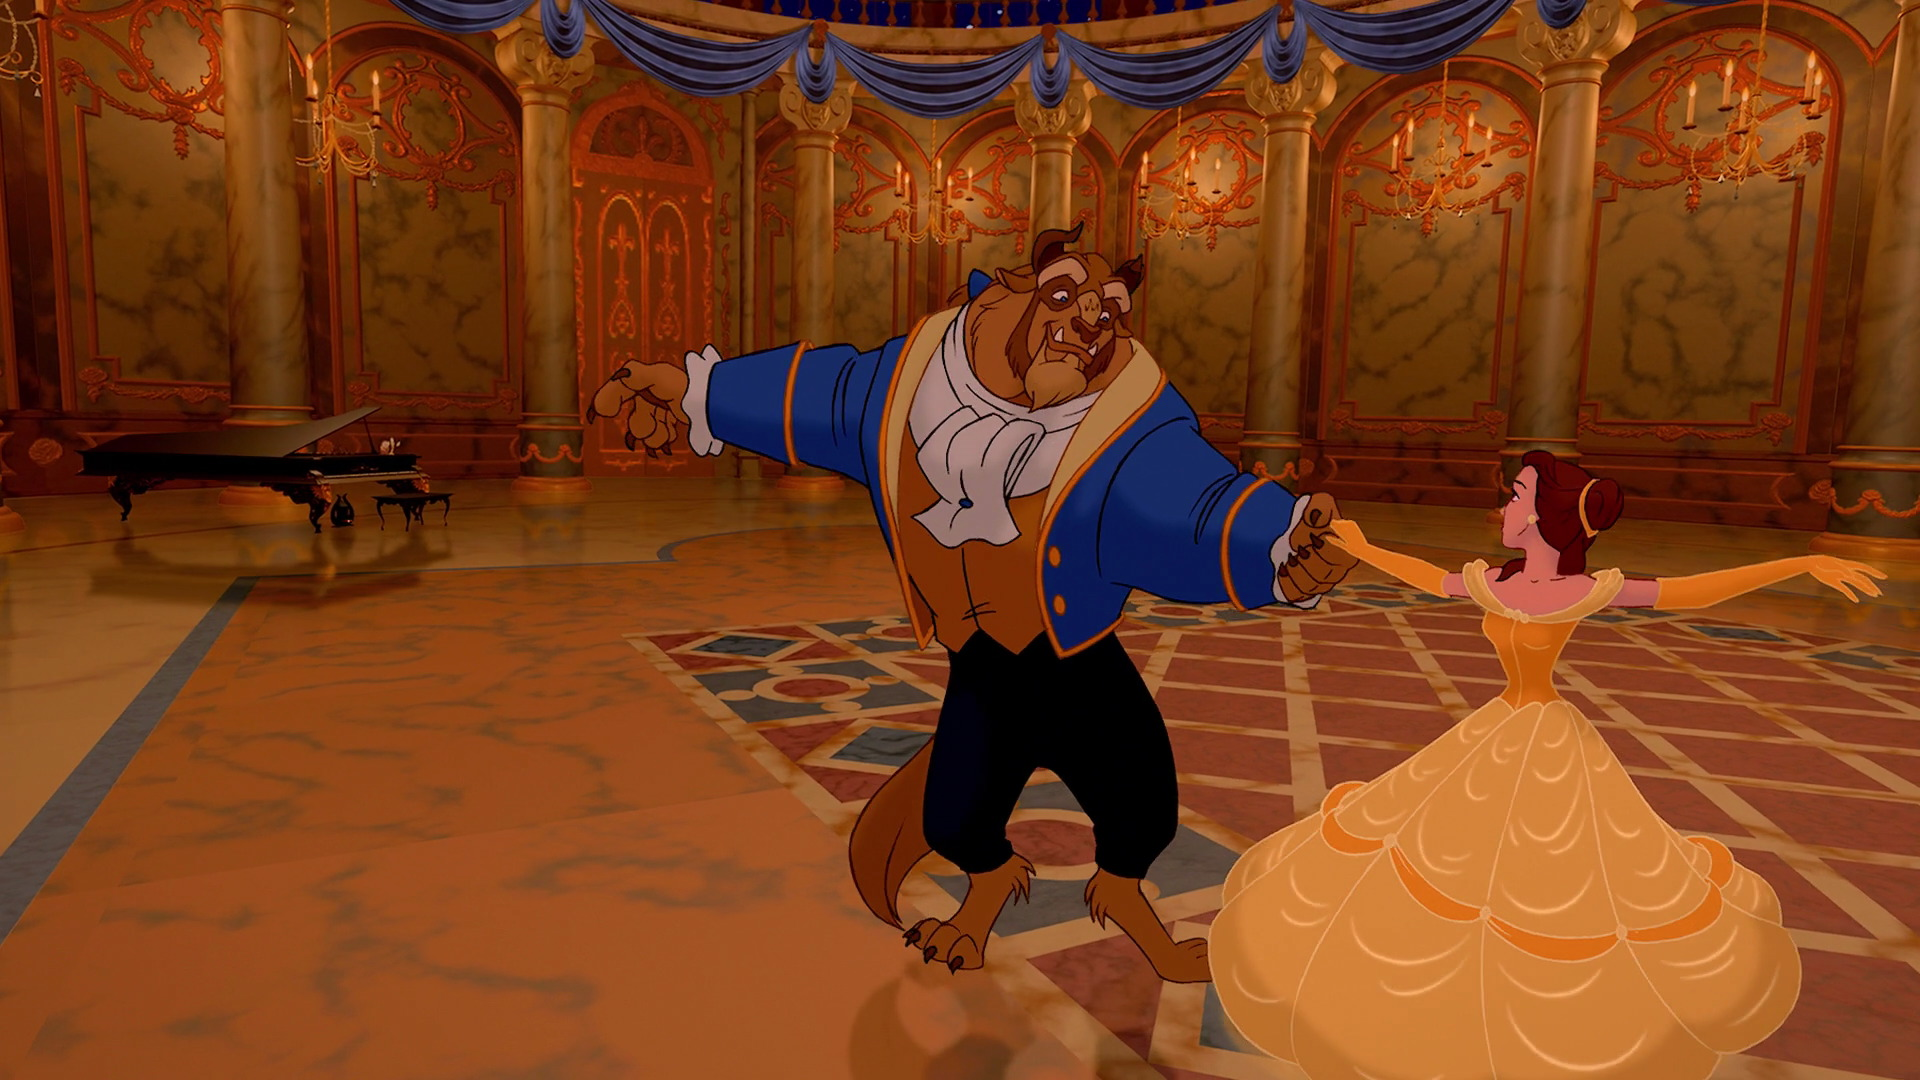 Beauty and the Beast (song) | Disney Wiki | FANDOM powered ...